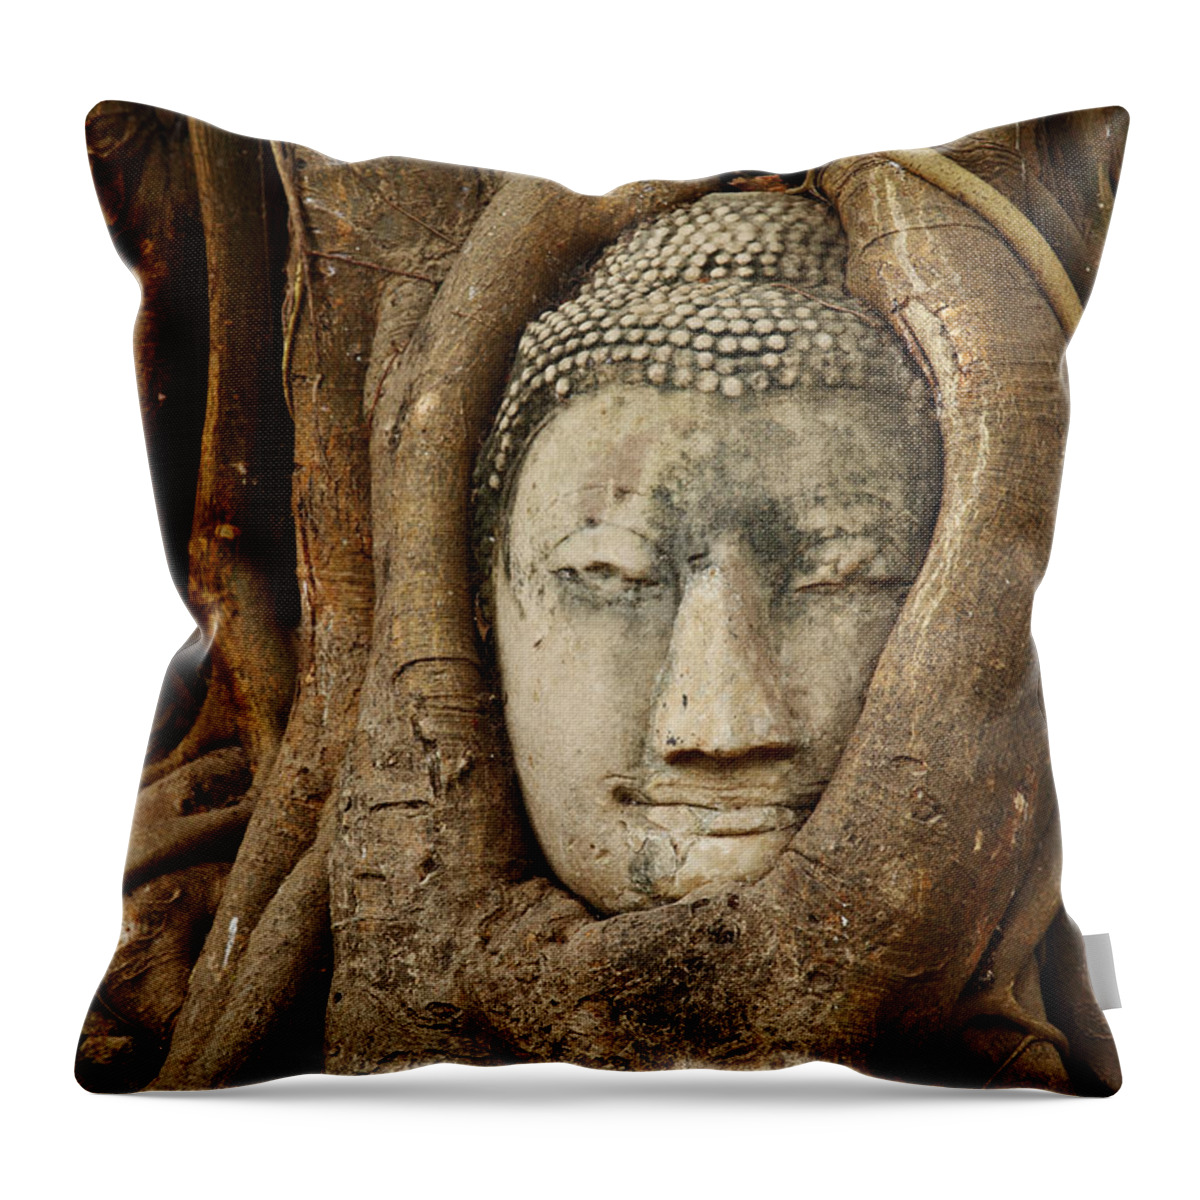 Southeast Asia Throw Pillow featuring the photograph Stone Buddha Head At Wat Phra Mahathat by Ngkaki